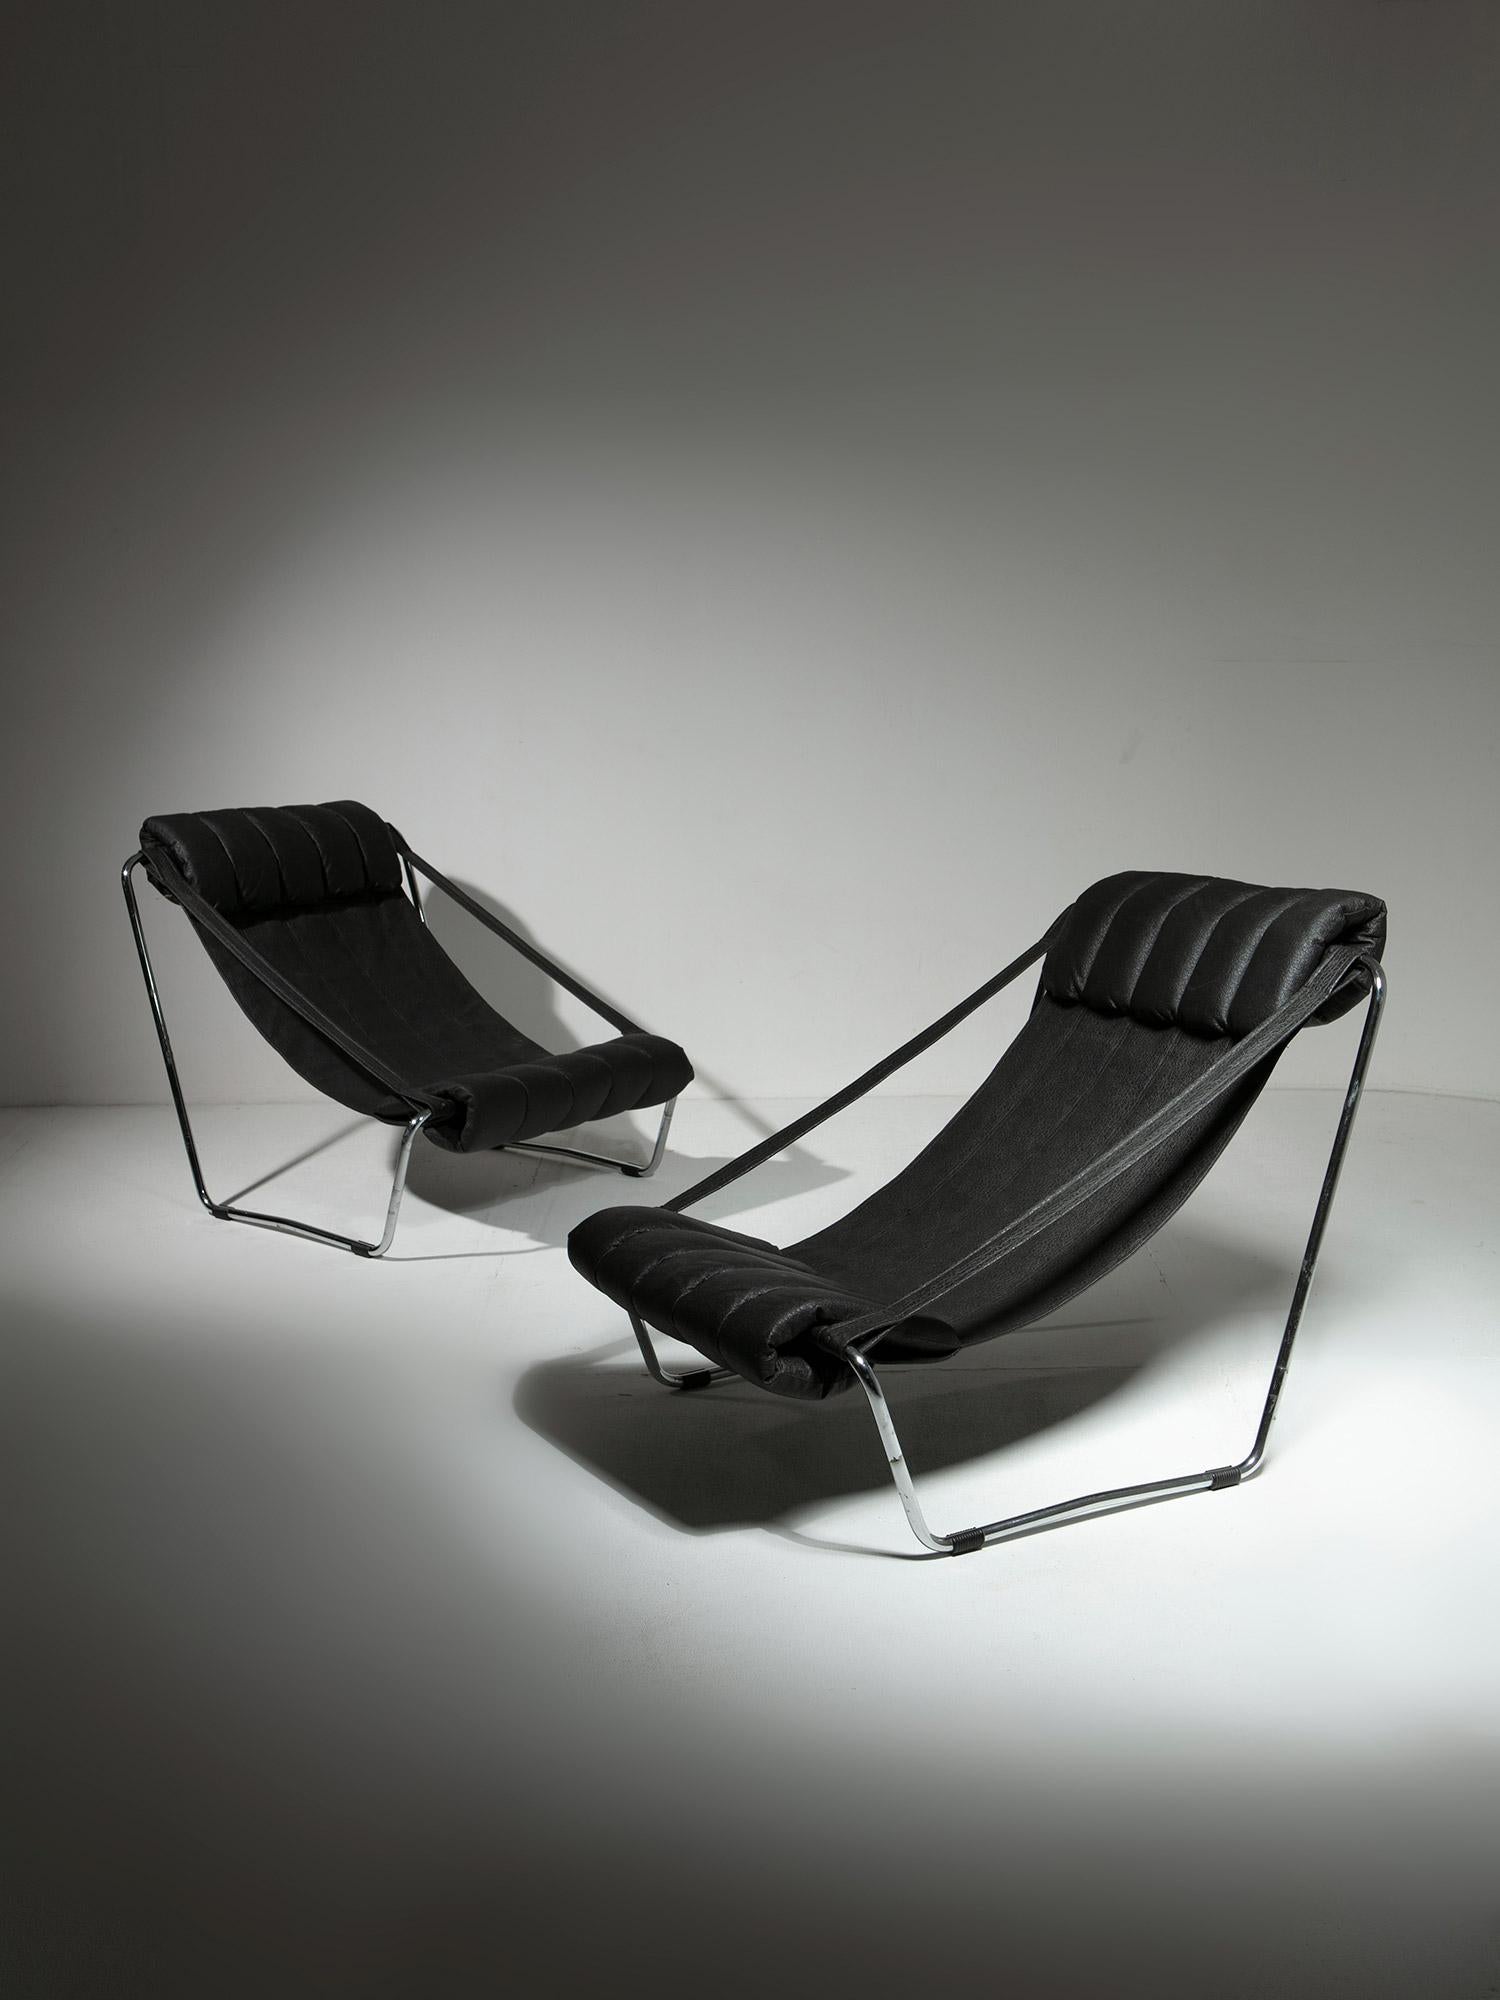 Sleek 70s lounge chairs attributed to Costantino Corsini and Giorgio Wiskemann for Cinova.
Lean chrome frame supporting a black artificial leather stripe.